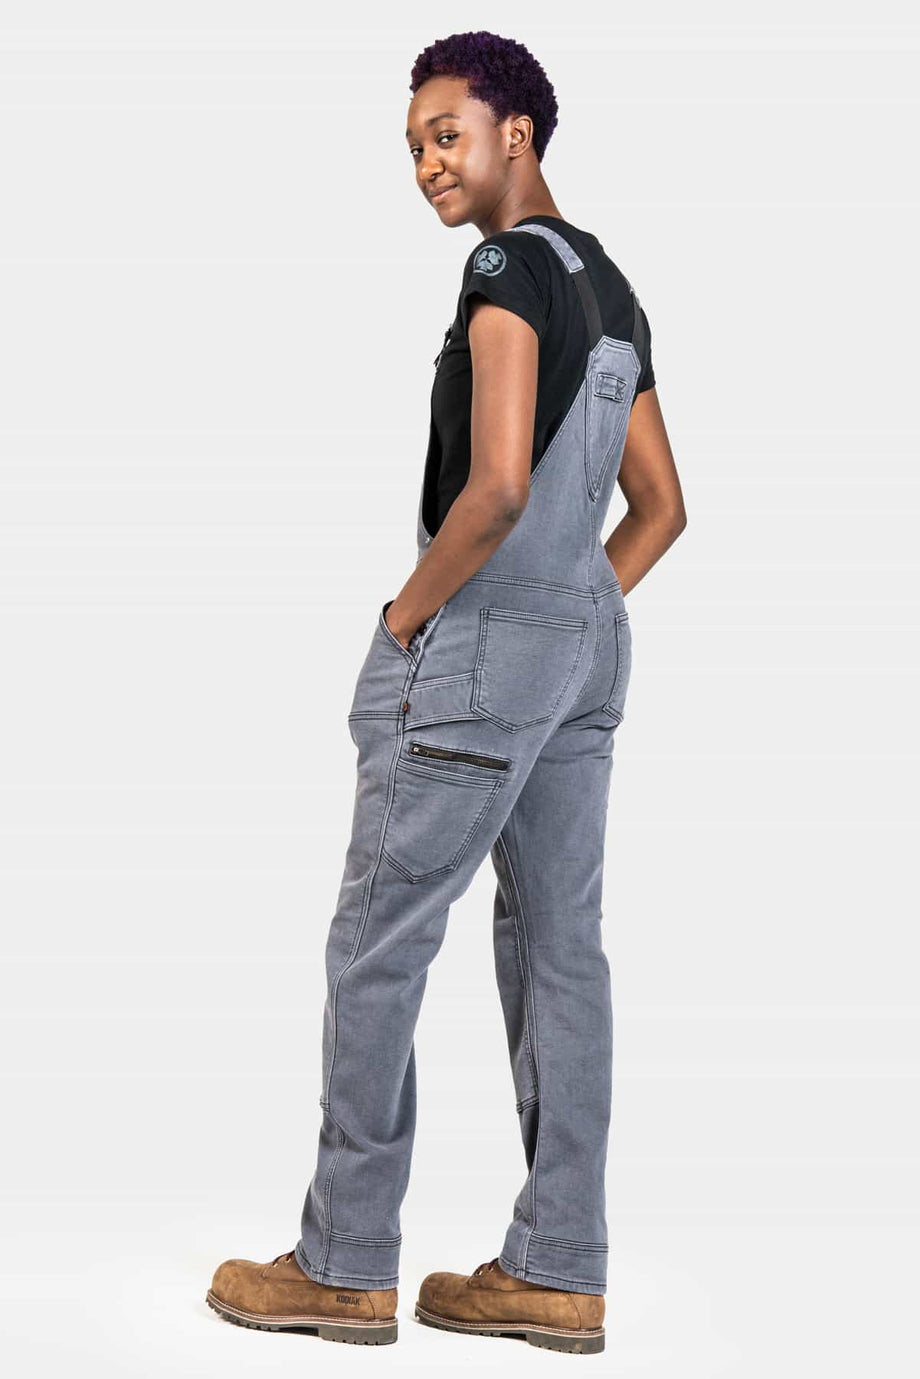 Freshley Overalls For Women in Grey Thermal Denim | Dovetail Workwear